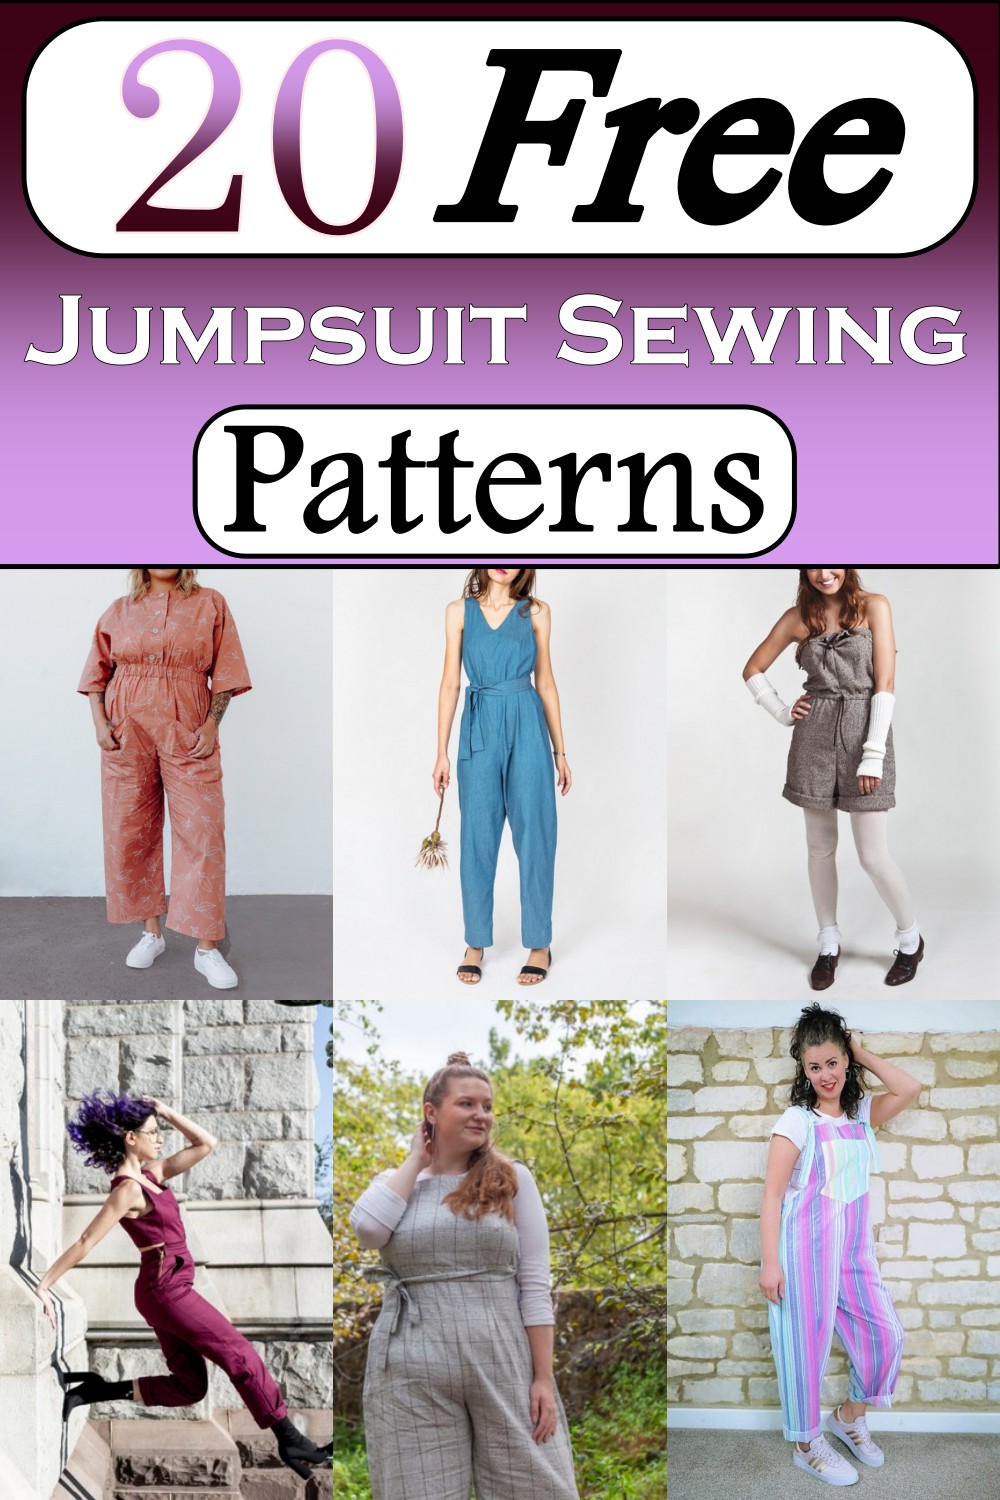 Free Jumpsuit Sewing Patterns 1